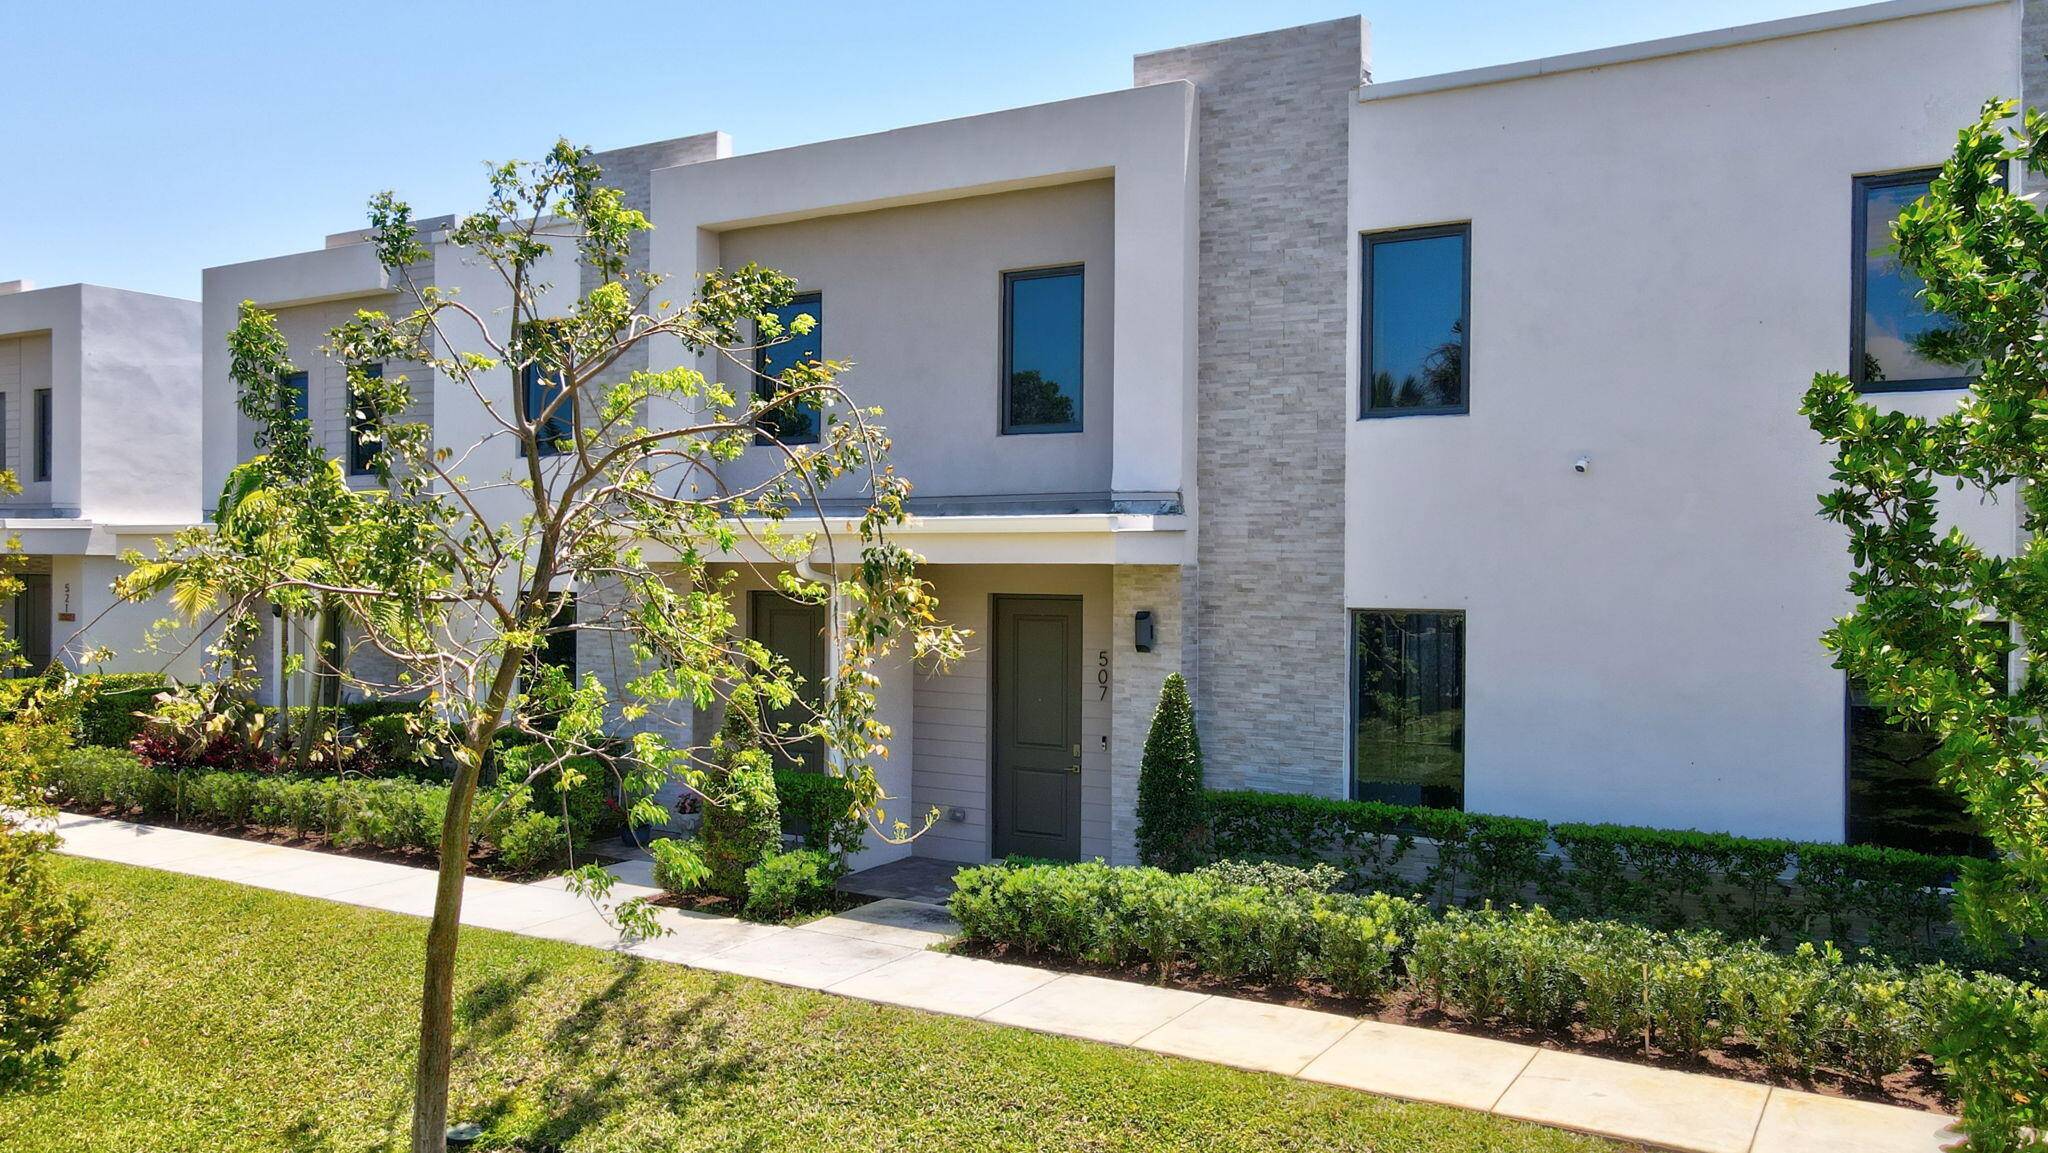 Modern elegance awaits you in this newly constructed Smart home townhouse nestled in the heart of Fort Lauderdale's desirable community of Gardenia Park.